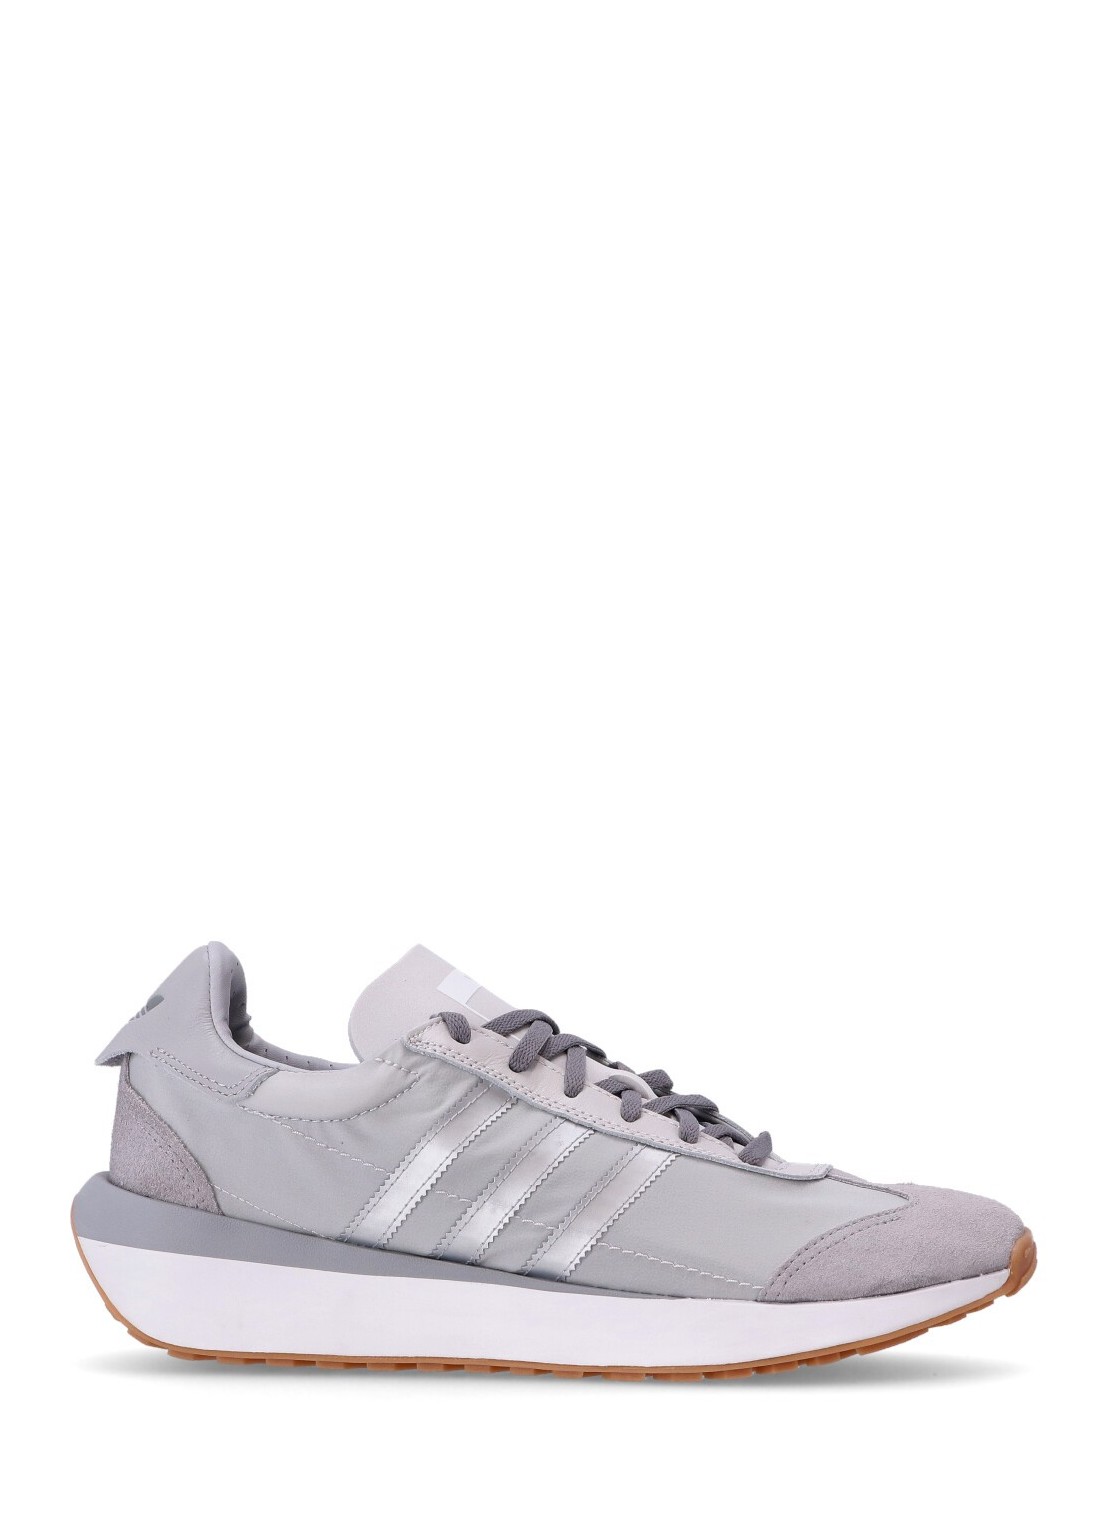 adidas originals country xlg - id0365 grey one metallic silver grey two ...